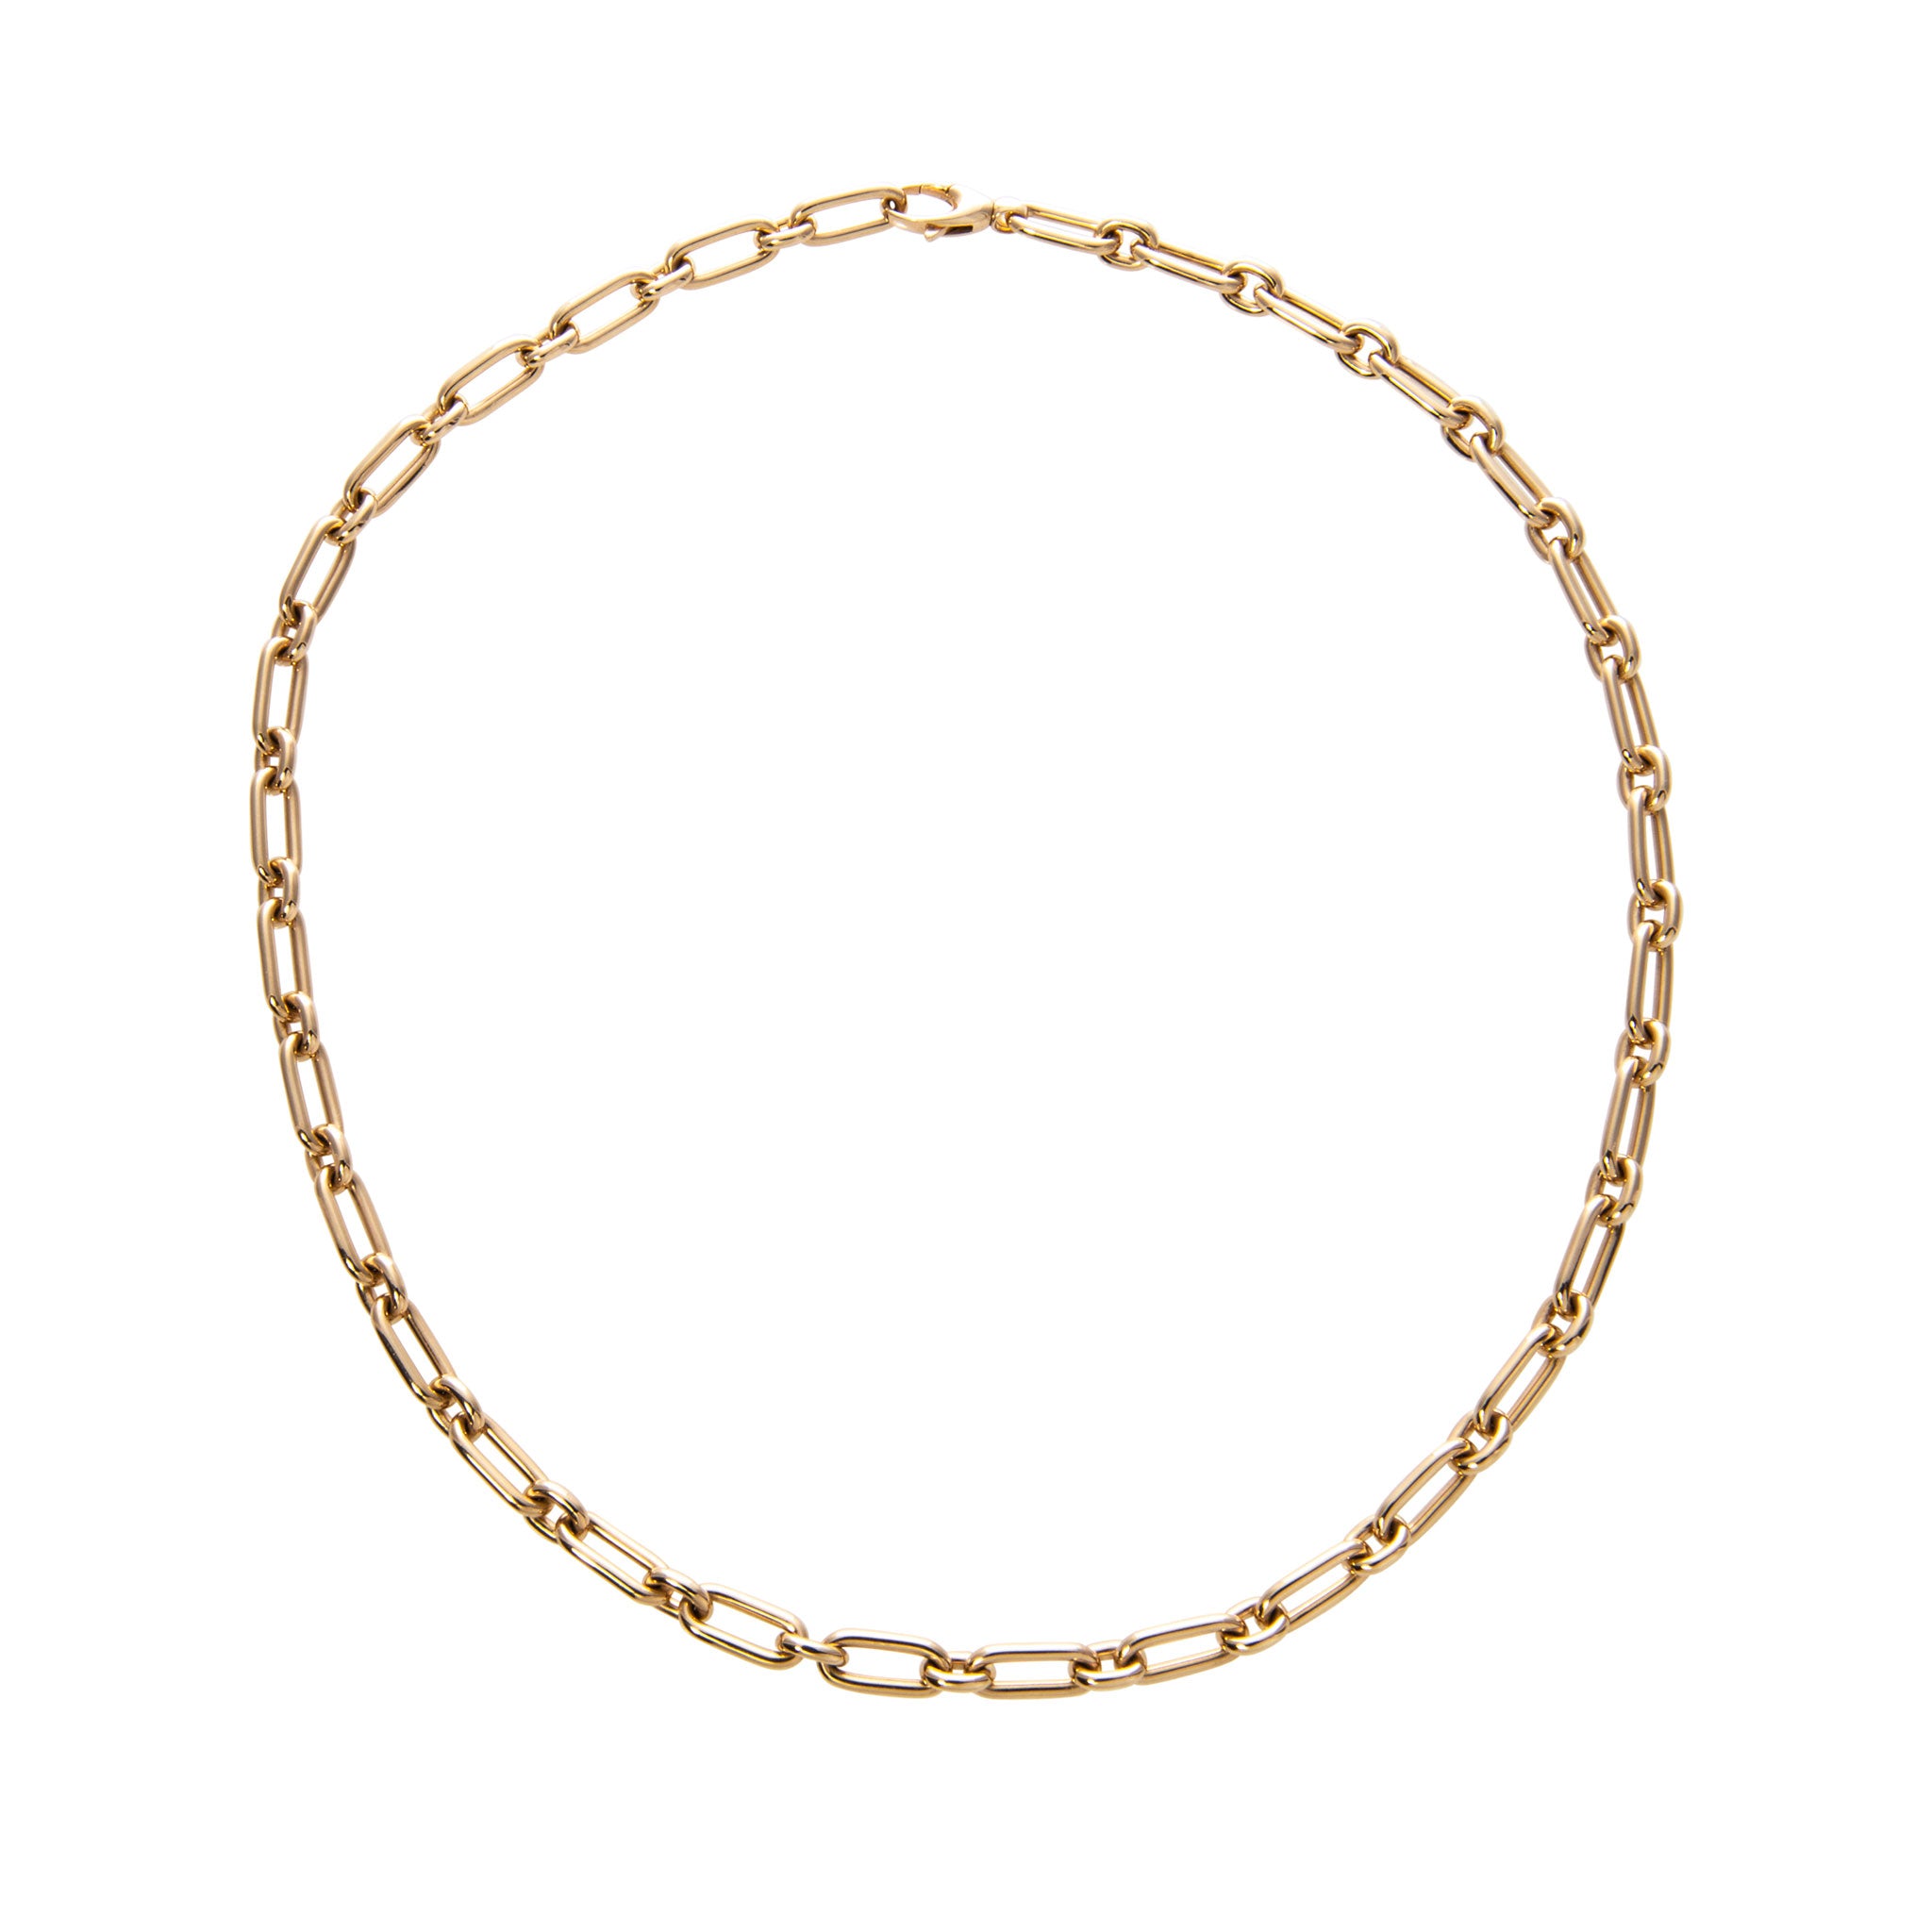 18K Yellow Gold Italian Oblong Oval Link Necklace 17 inches